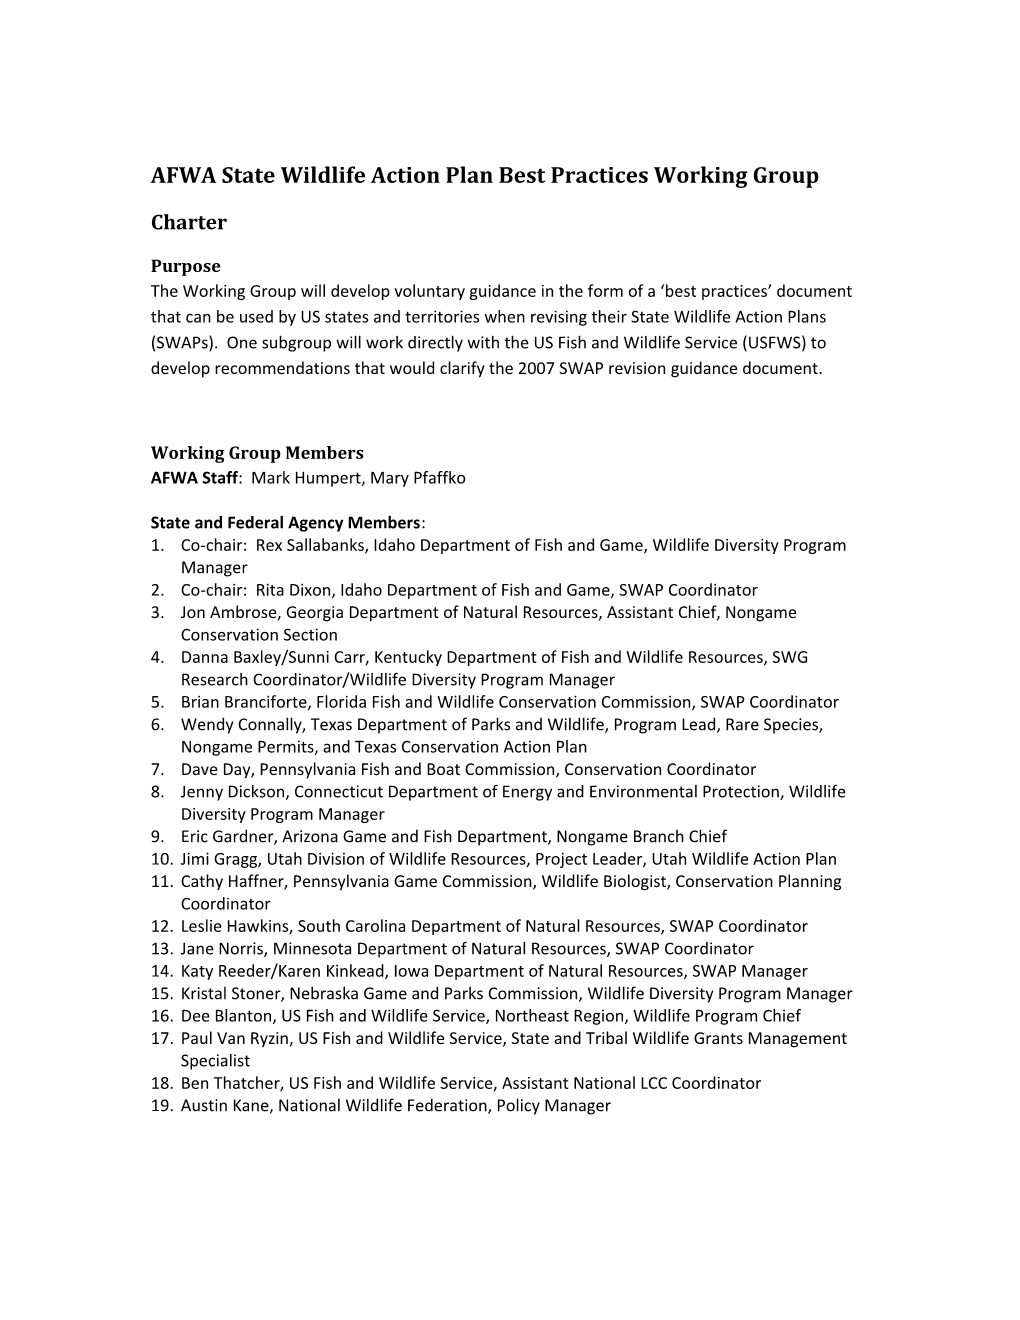 AFWA State Wildlife Action Plan Best Practices Working Group